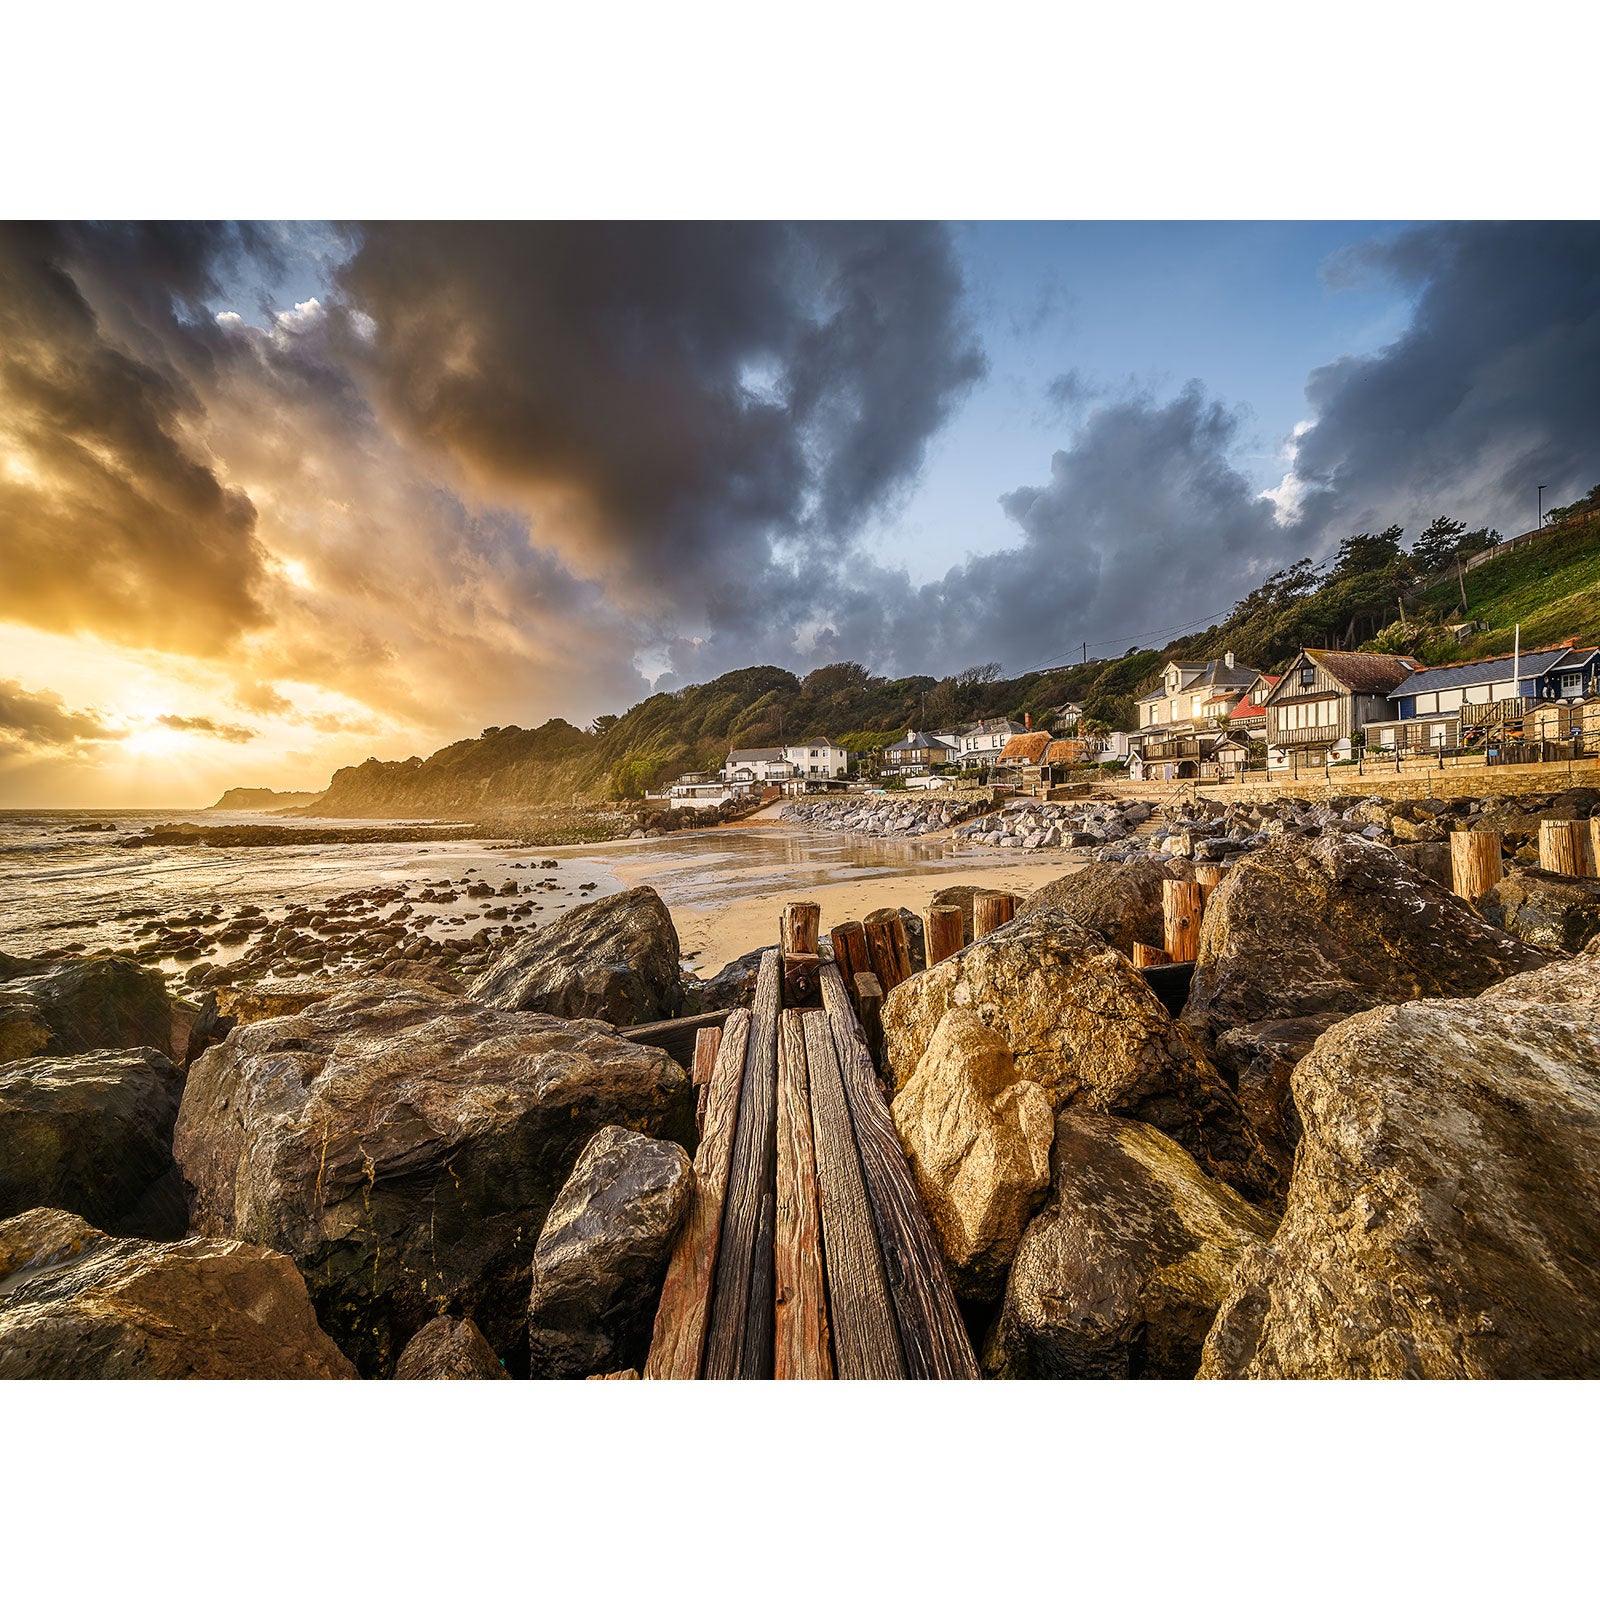 A scenic coastal village at sunset with a rustic wooden jetty and rocky shoreline on the Isle of Wight under a dramatic sky by Available Light Photography featuring Steephill Cove.